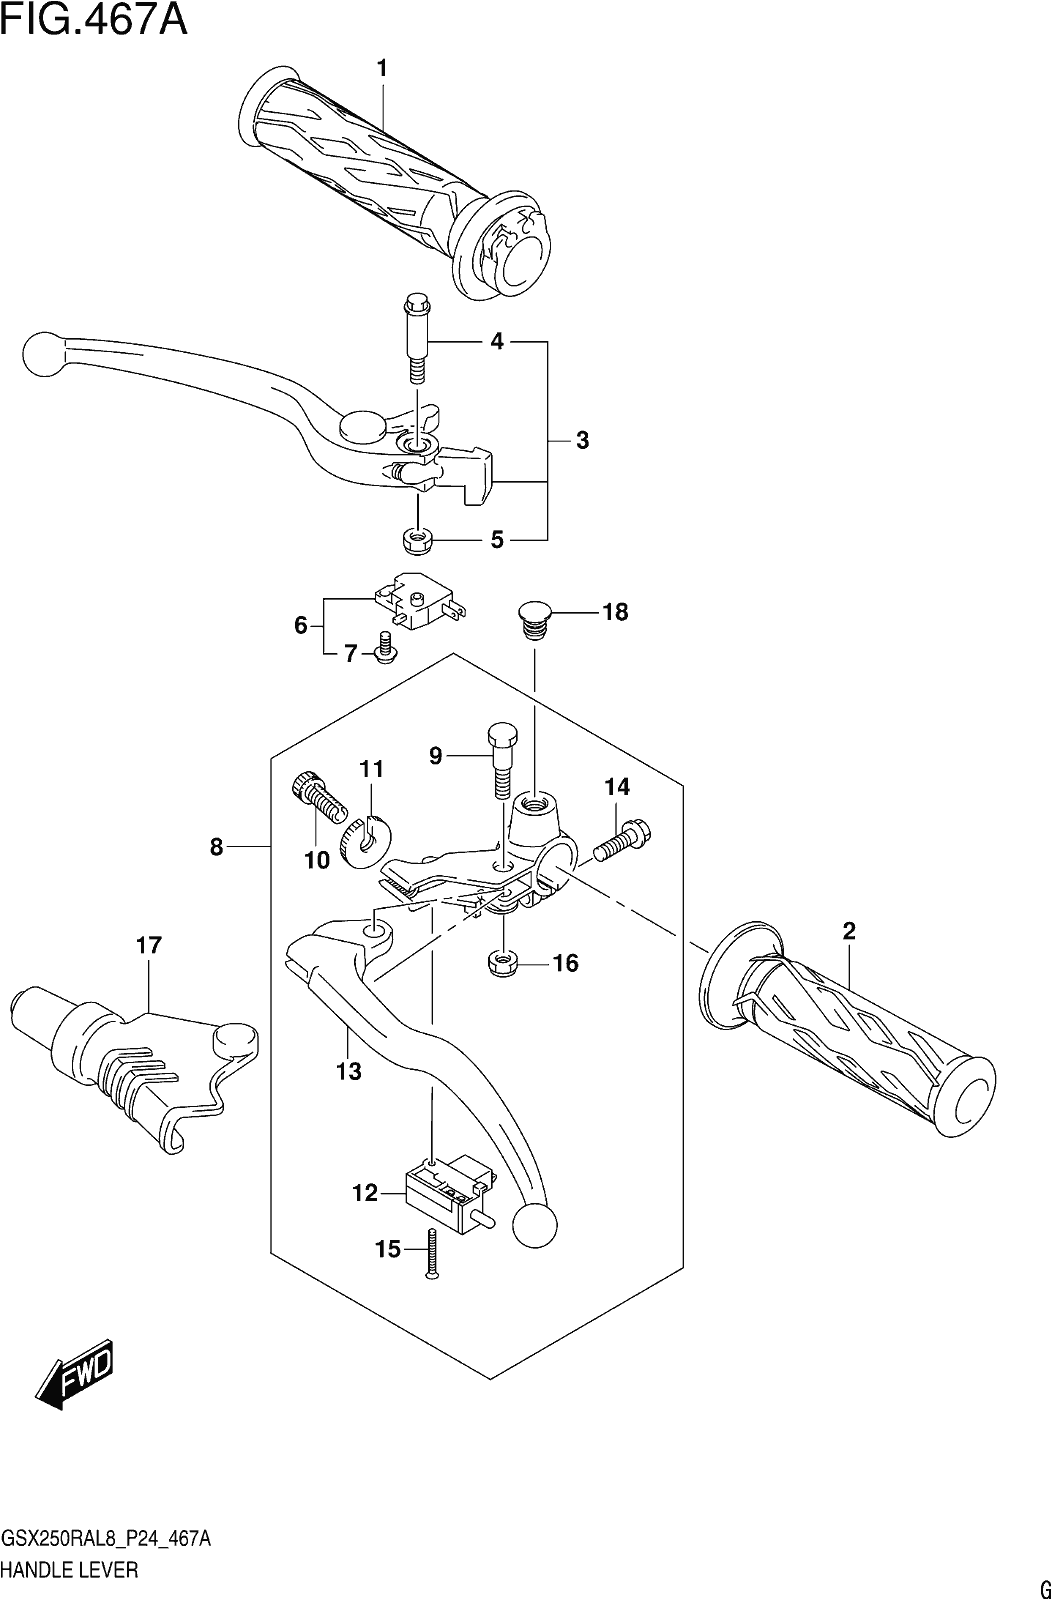 Fig.467a Handle Lever